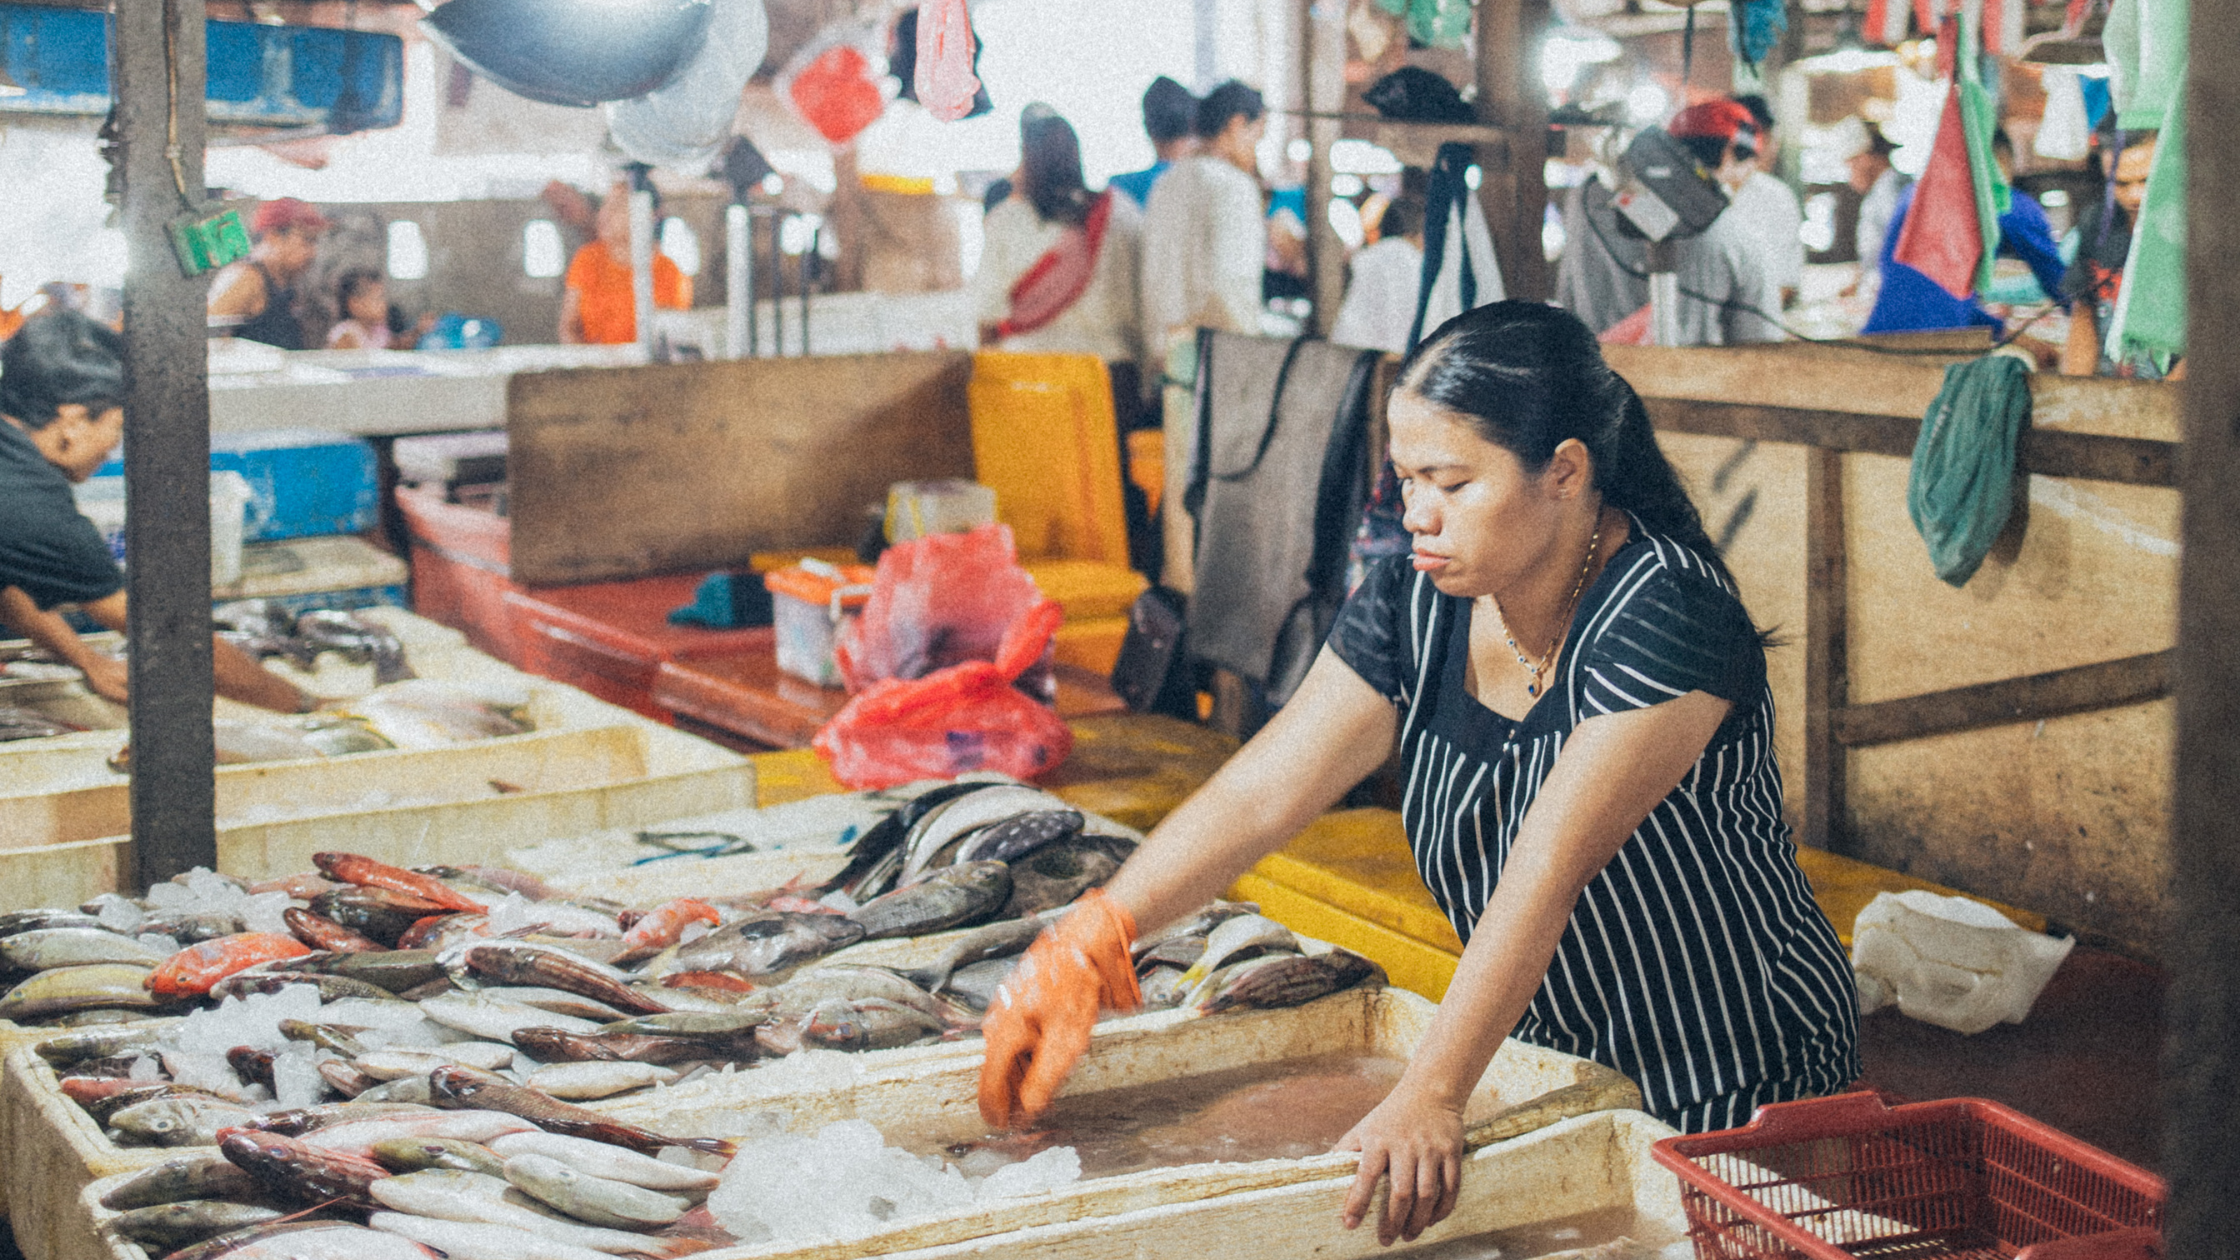 5 of the World's Best Fish Markets You Should Know About